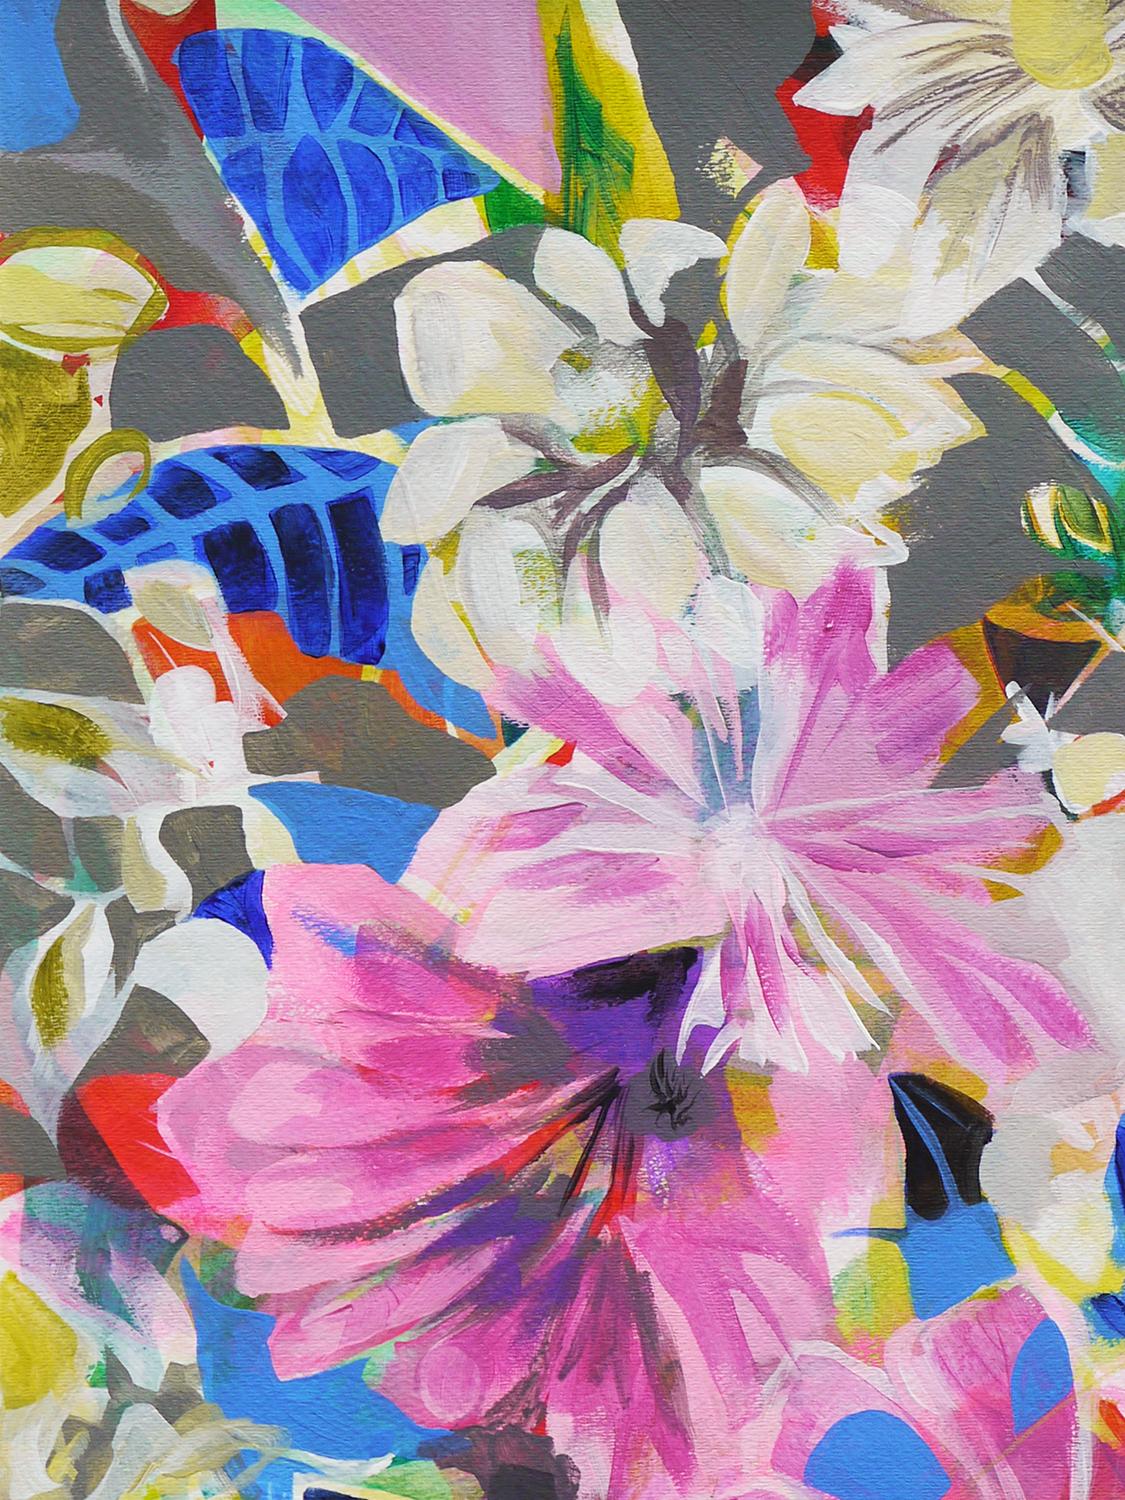 <p>Artist Comments<br>An energetic still life blooming with lush colors and intricate patterns. The clusters of purple, olive green, and warm grays liven the surface of the painting. 